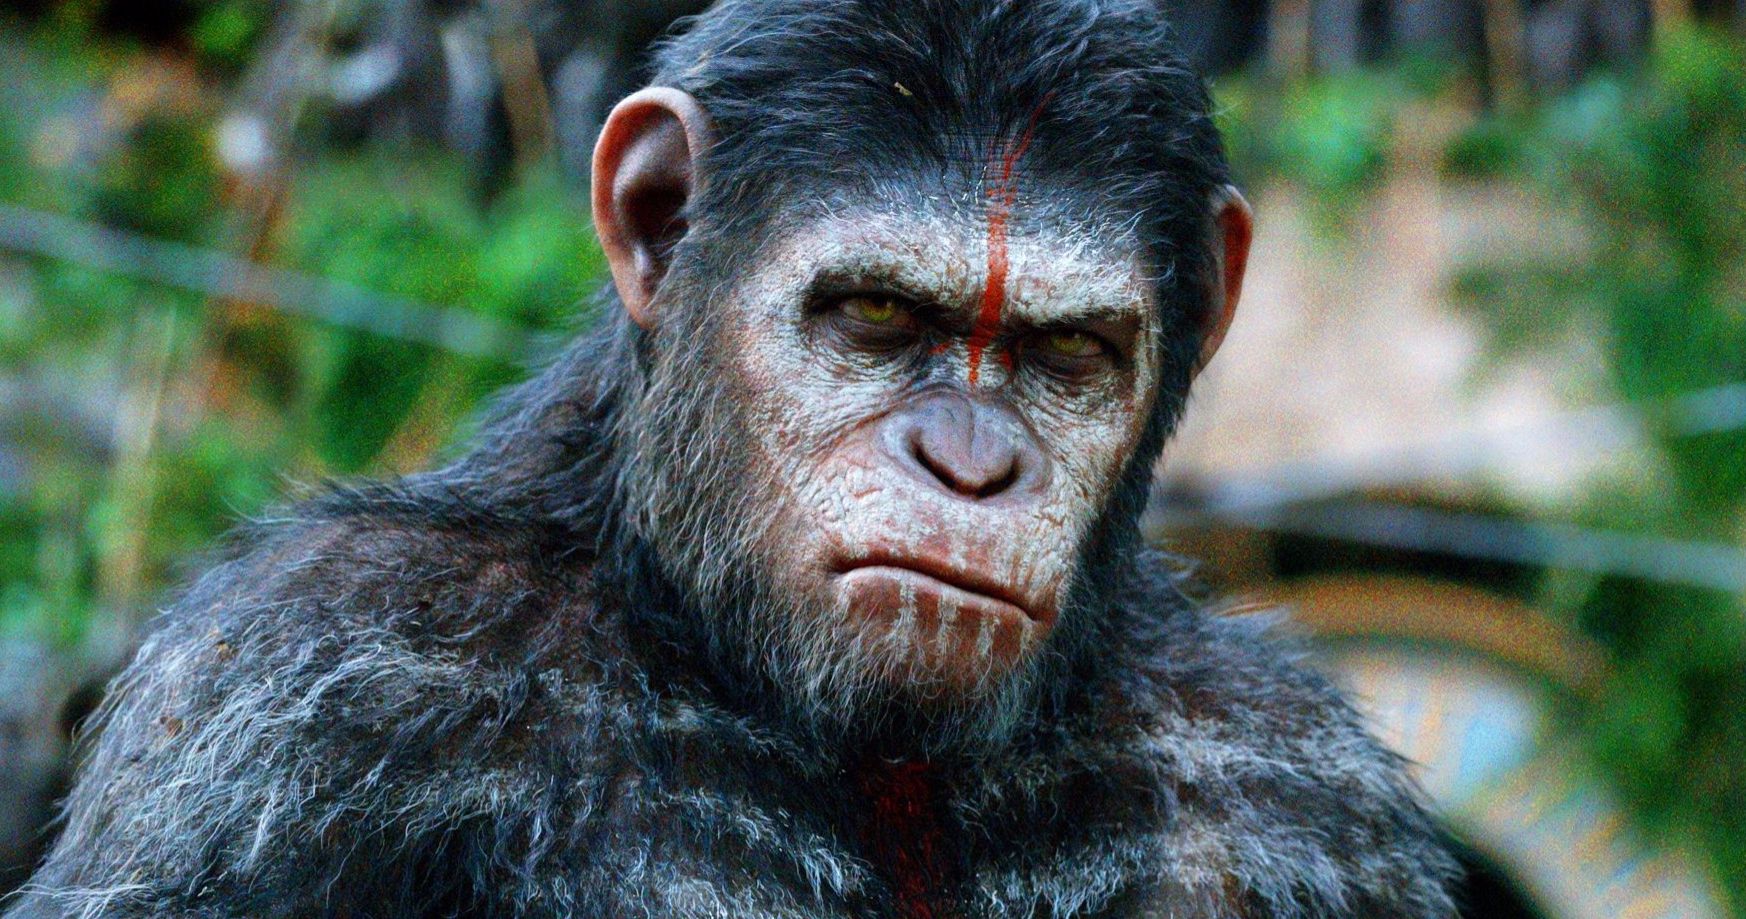 New Planet of the Apes Movies Planned at Disney, Will Be a Continuation of the Saga